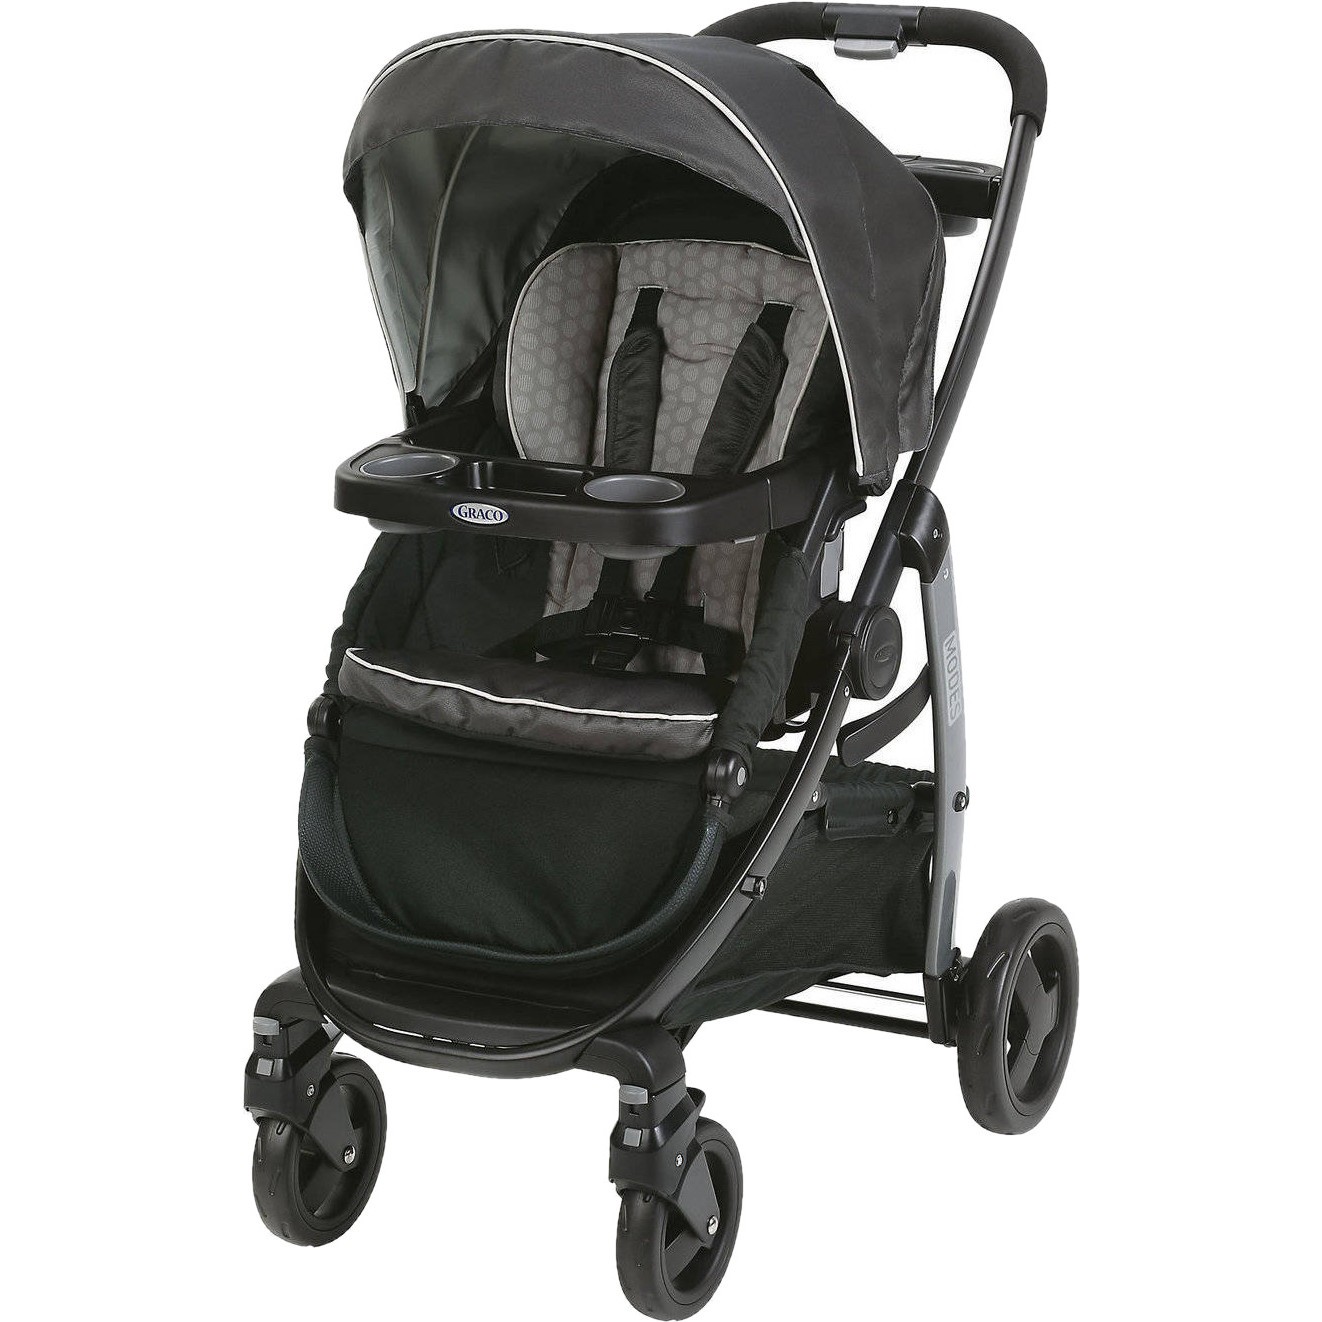 Looking to Buy the Best Graco Stroller. Here